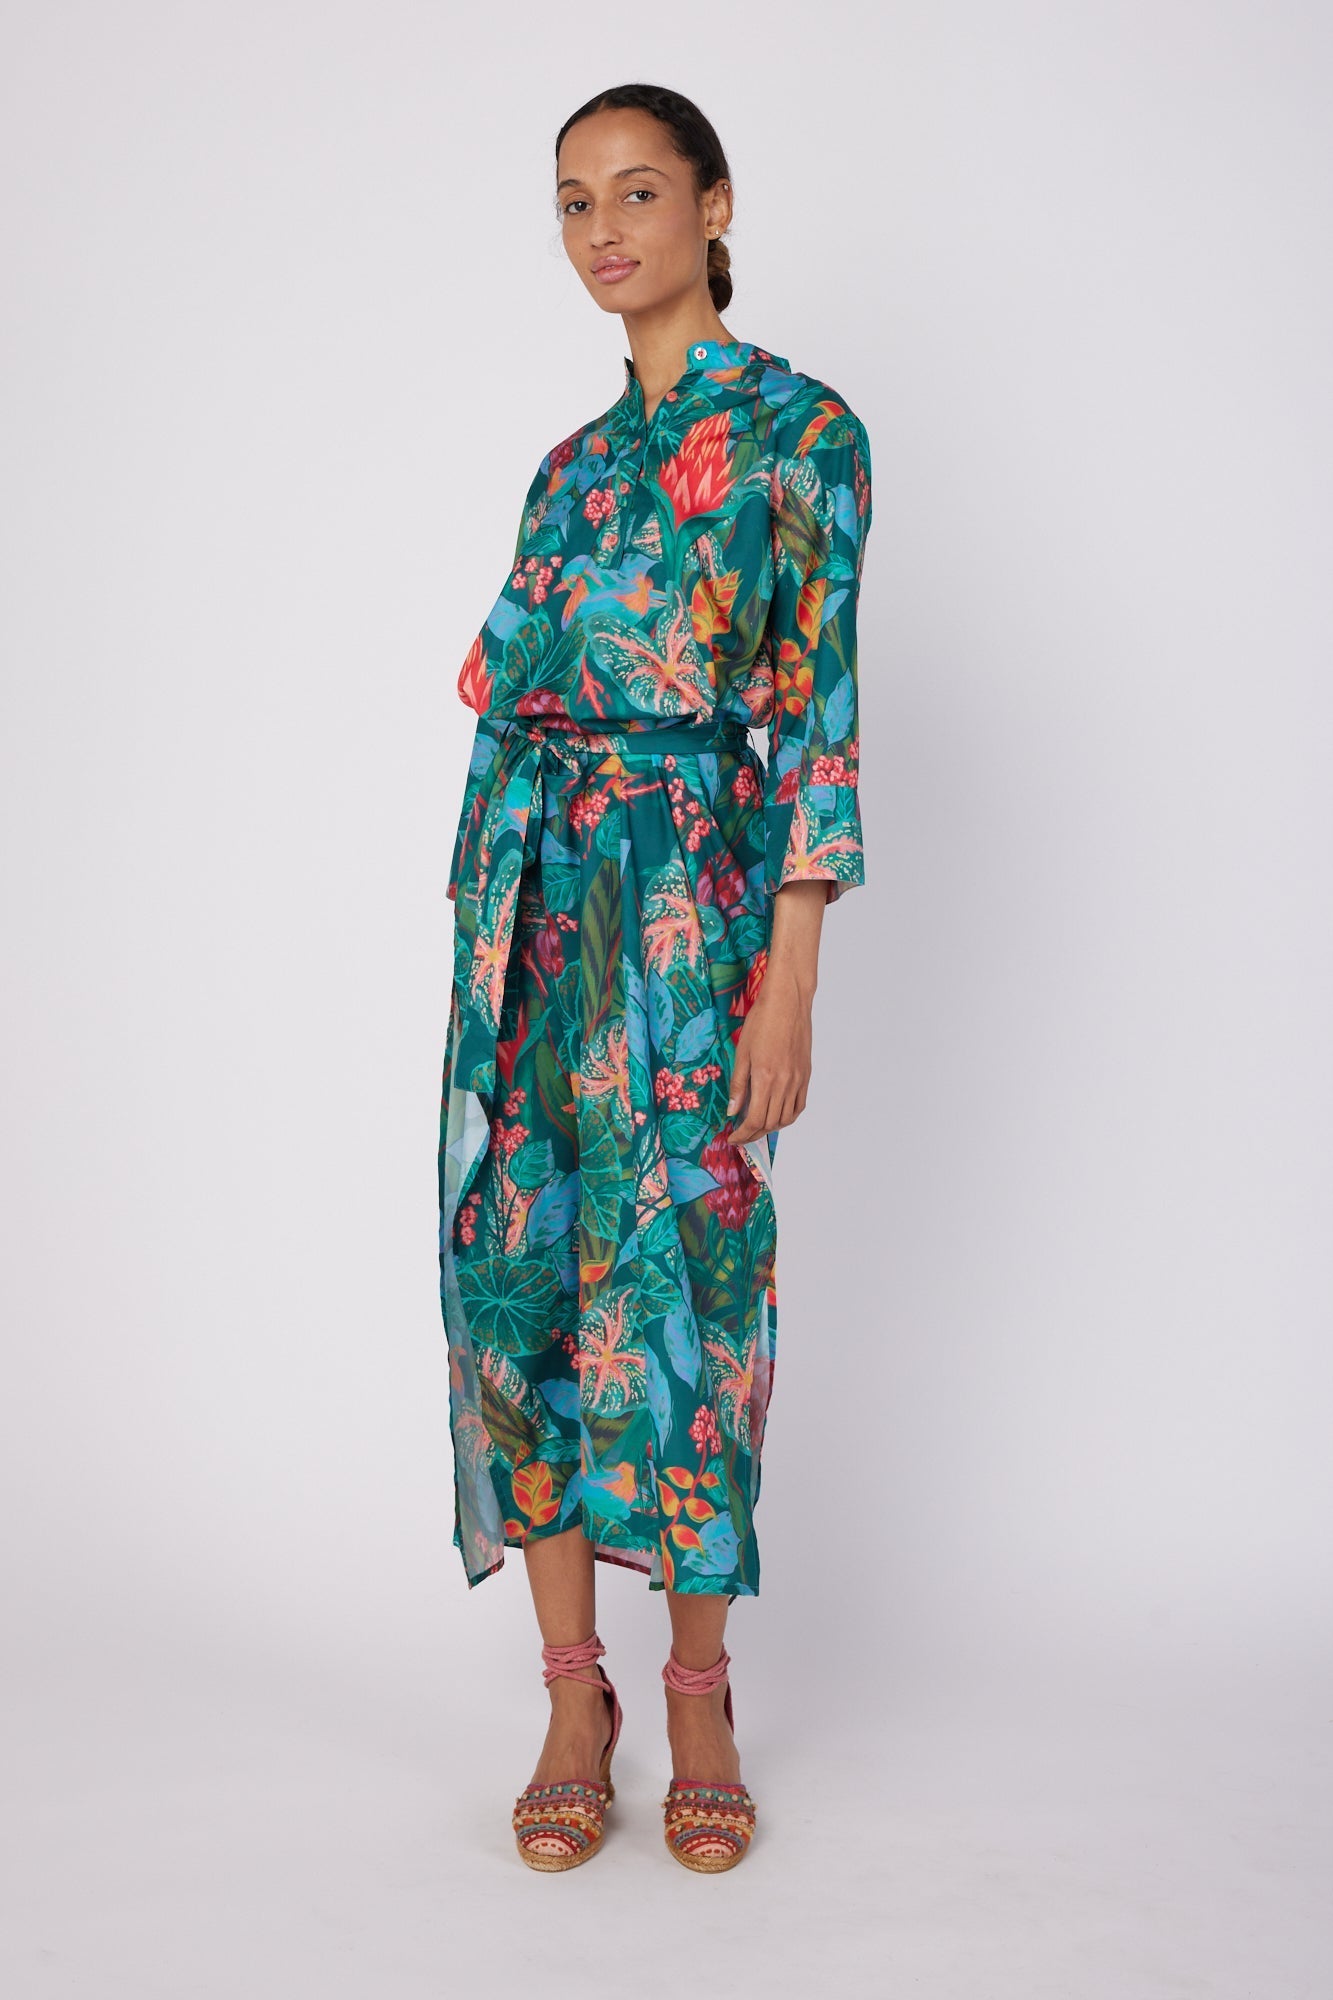 ModaPosa Elina 3/4 Sleeve Maxi Caftan Dress with Detachable Belt in Tropical Canopy . Discover women's resort dresses and lifestyle clothing inspired by the Mediterranean. Free worldwide shipping available!